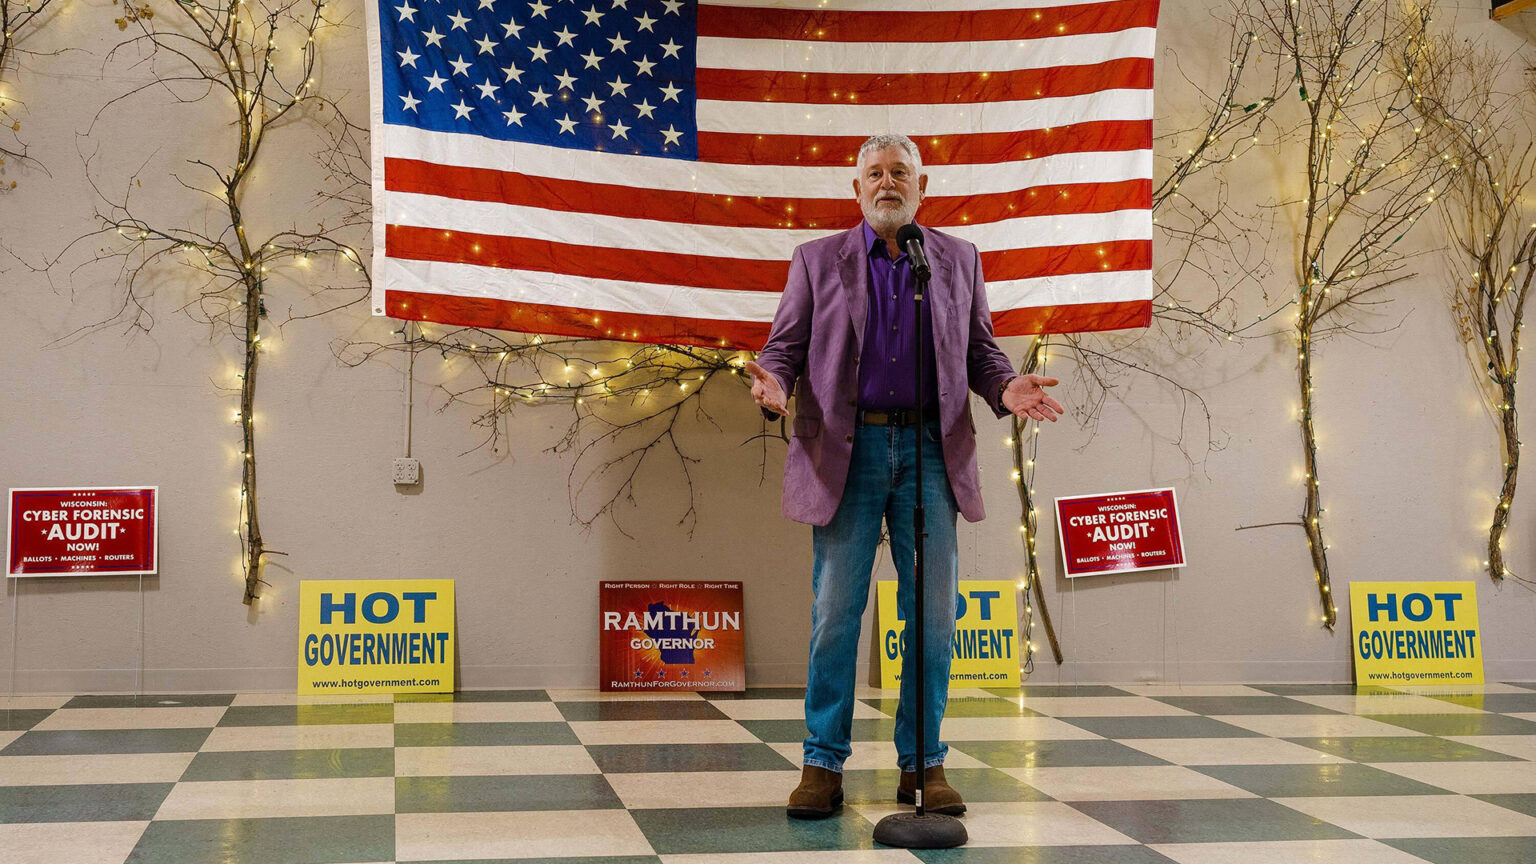 Jay Stone stands in a room speaking into a microphone, with an American flag, political signs and tree branches with LED lights mounted against a wall in the background.